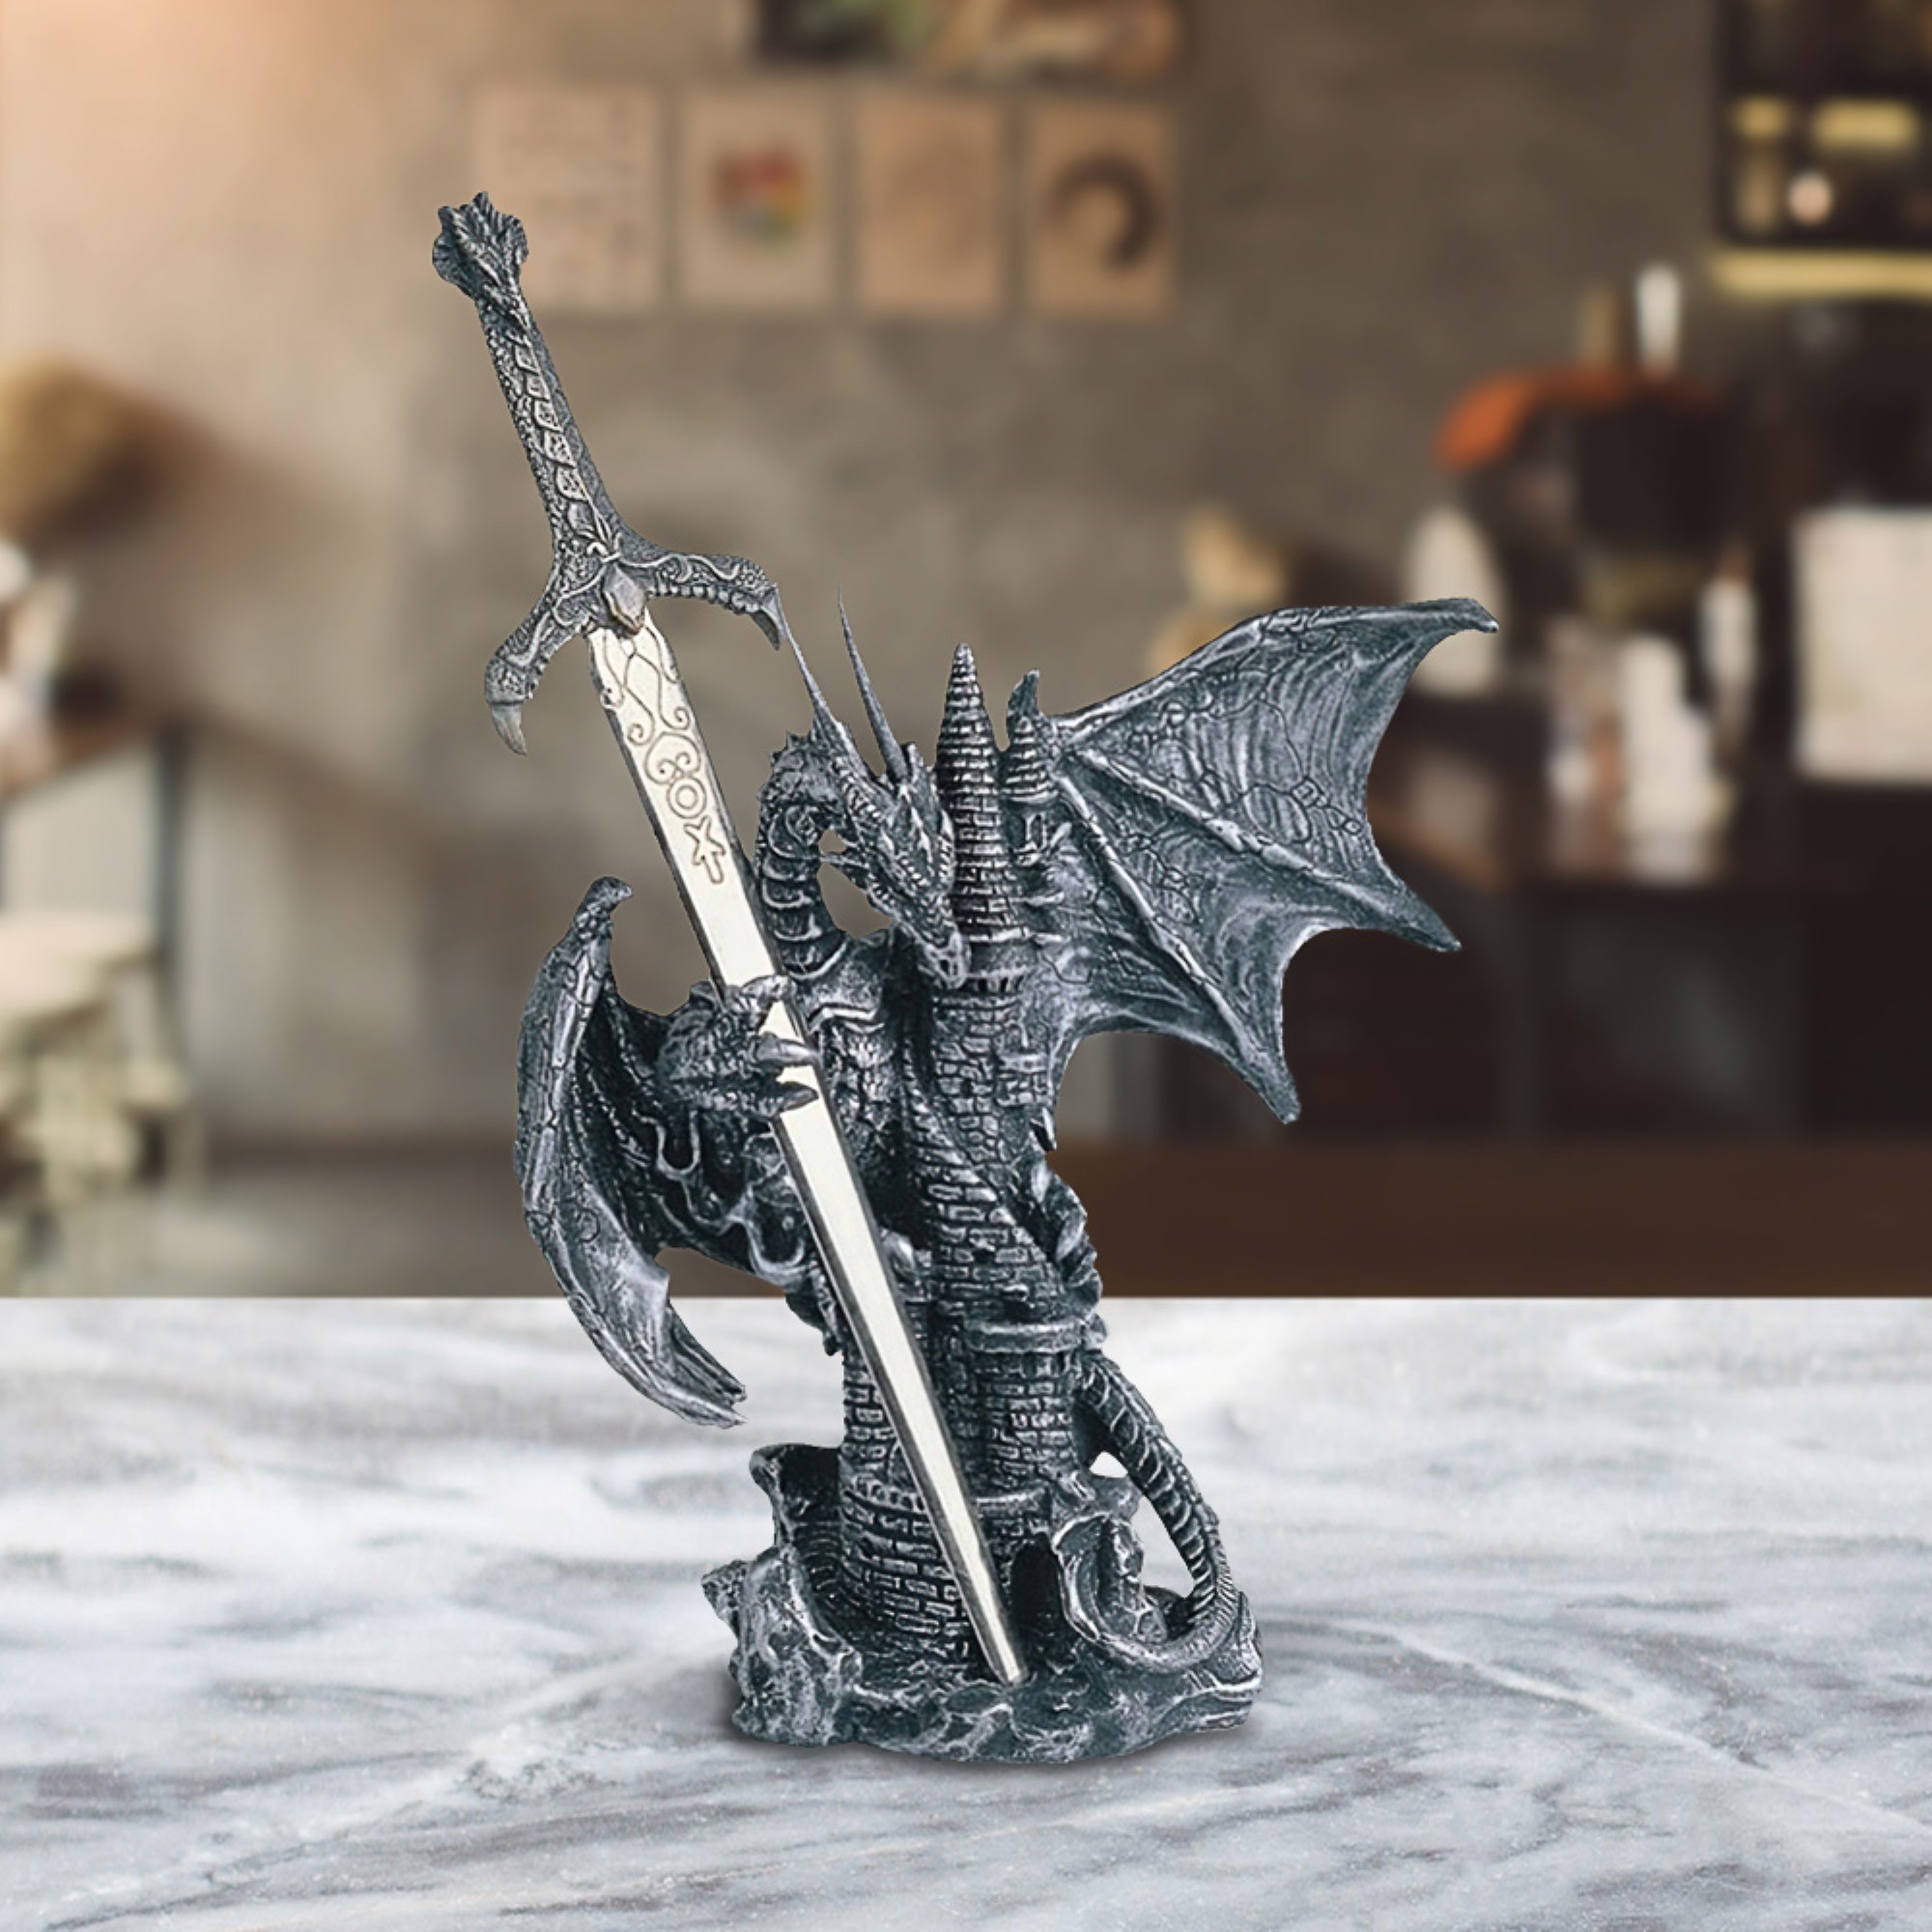 

5"h Medieval Silver Dragon On Castle With Sword Figurine Statue Home/room Decor And Perfect Gift Ideas For House Warming, Holidays And Birthdays Great Collectible Addition